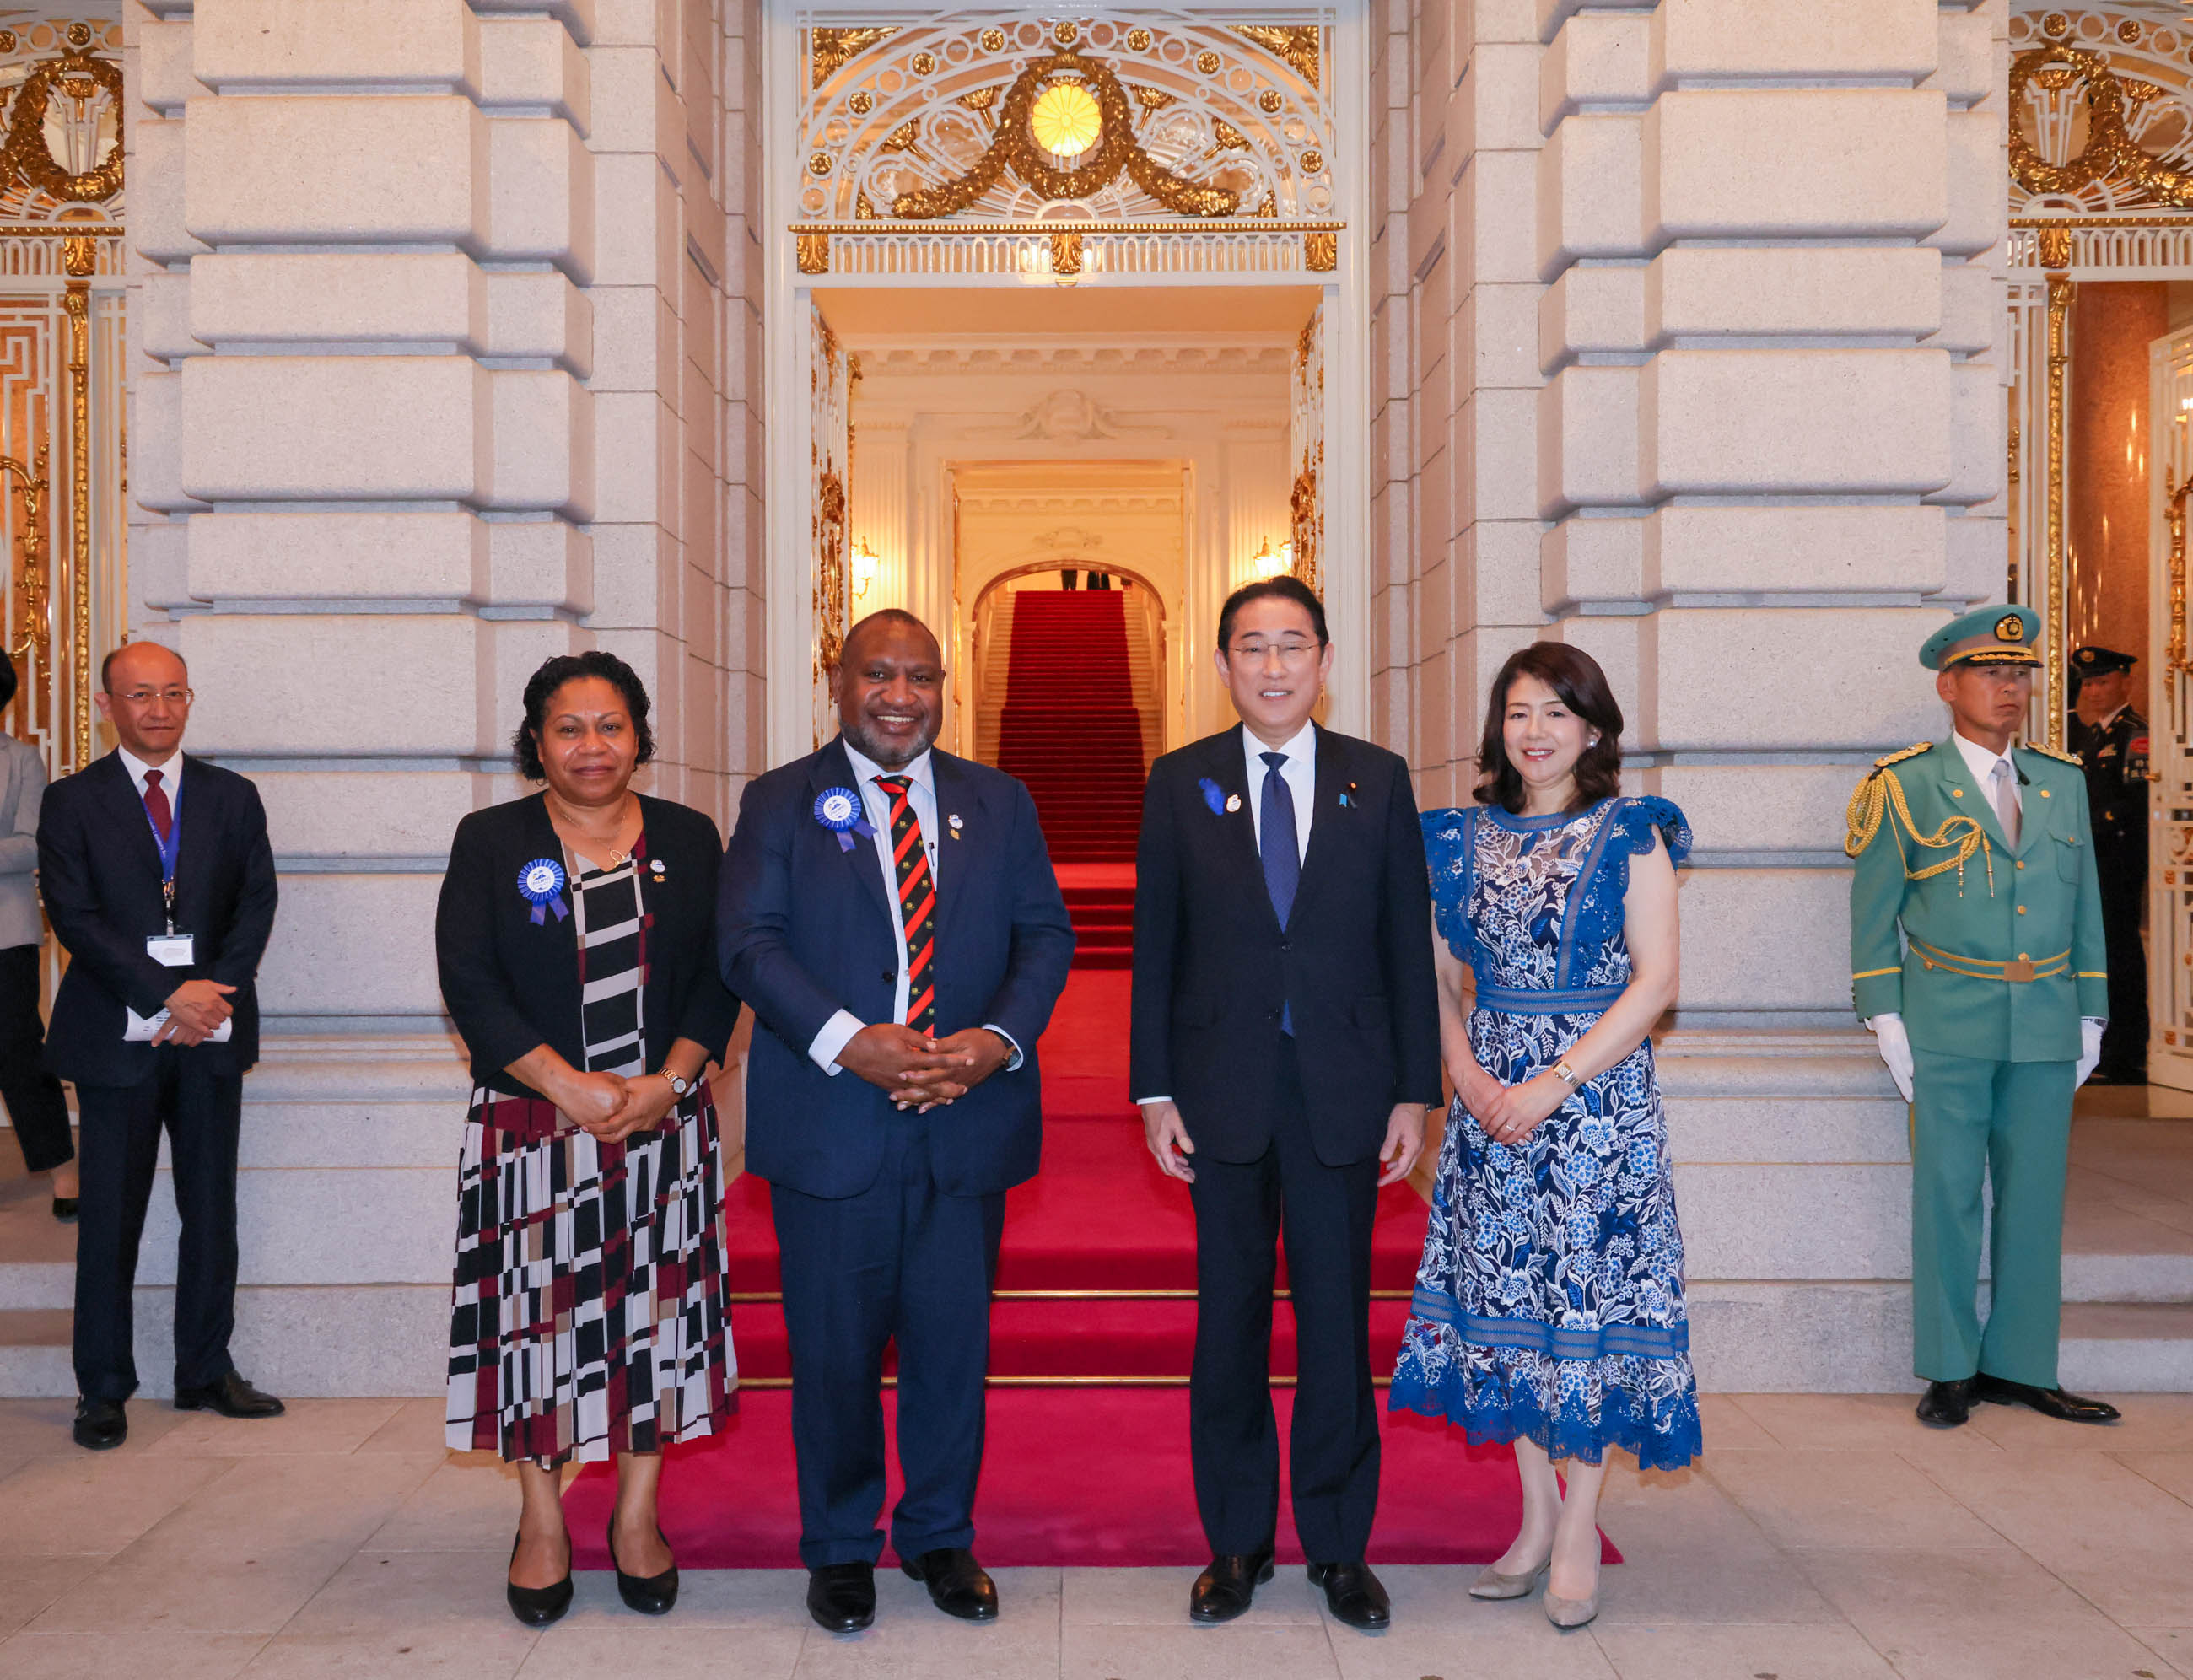 Prime Minister Kishida welcoming Hon. Mr. James MARAPE, Prime Minister of the Independent State of Papua New Guinea and Mrs. MARAPE 